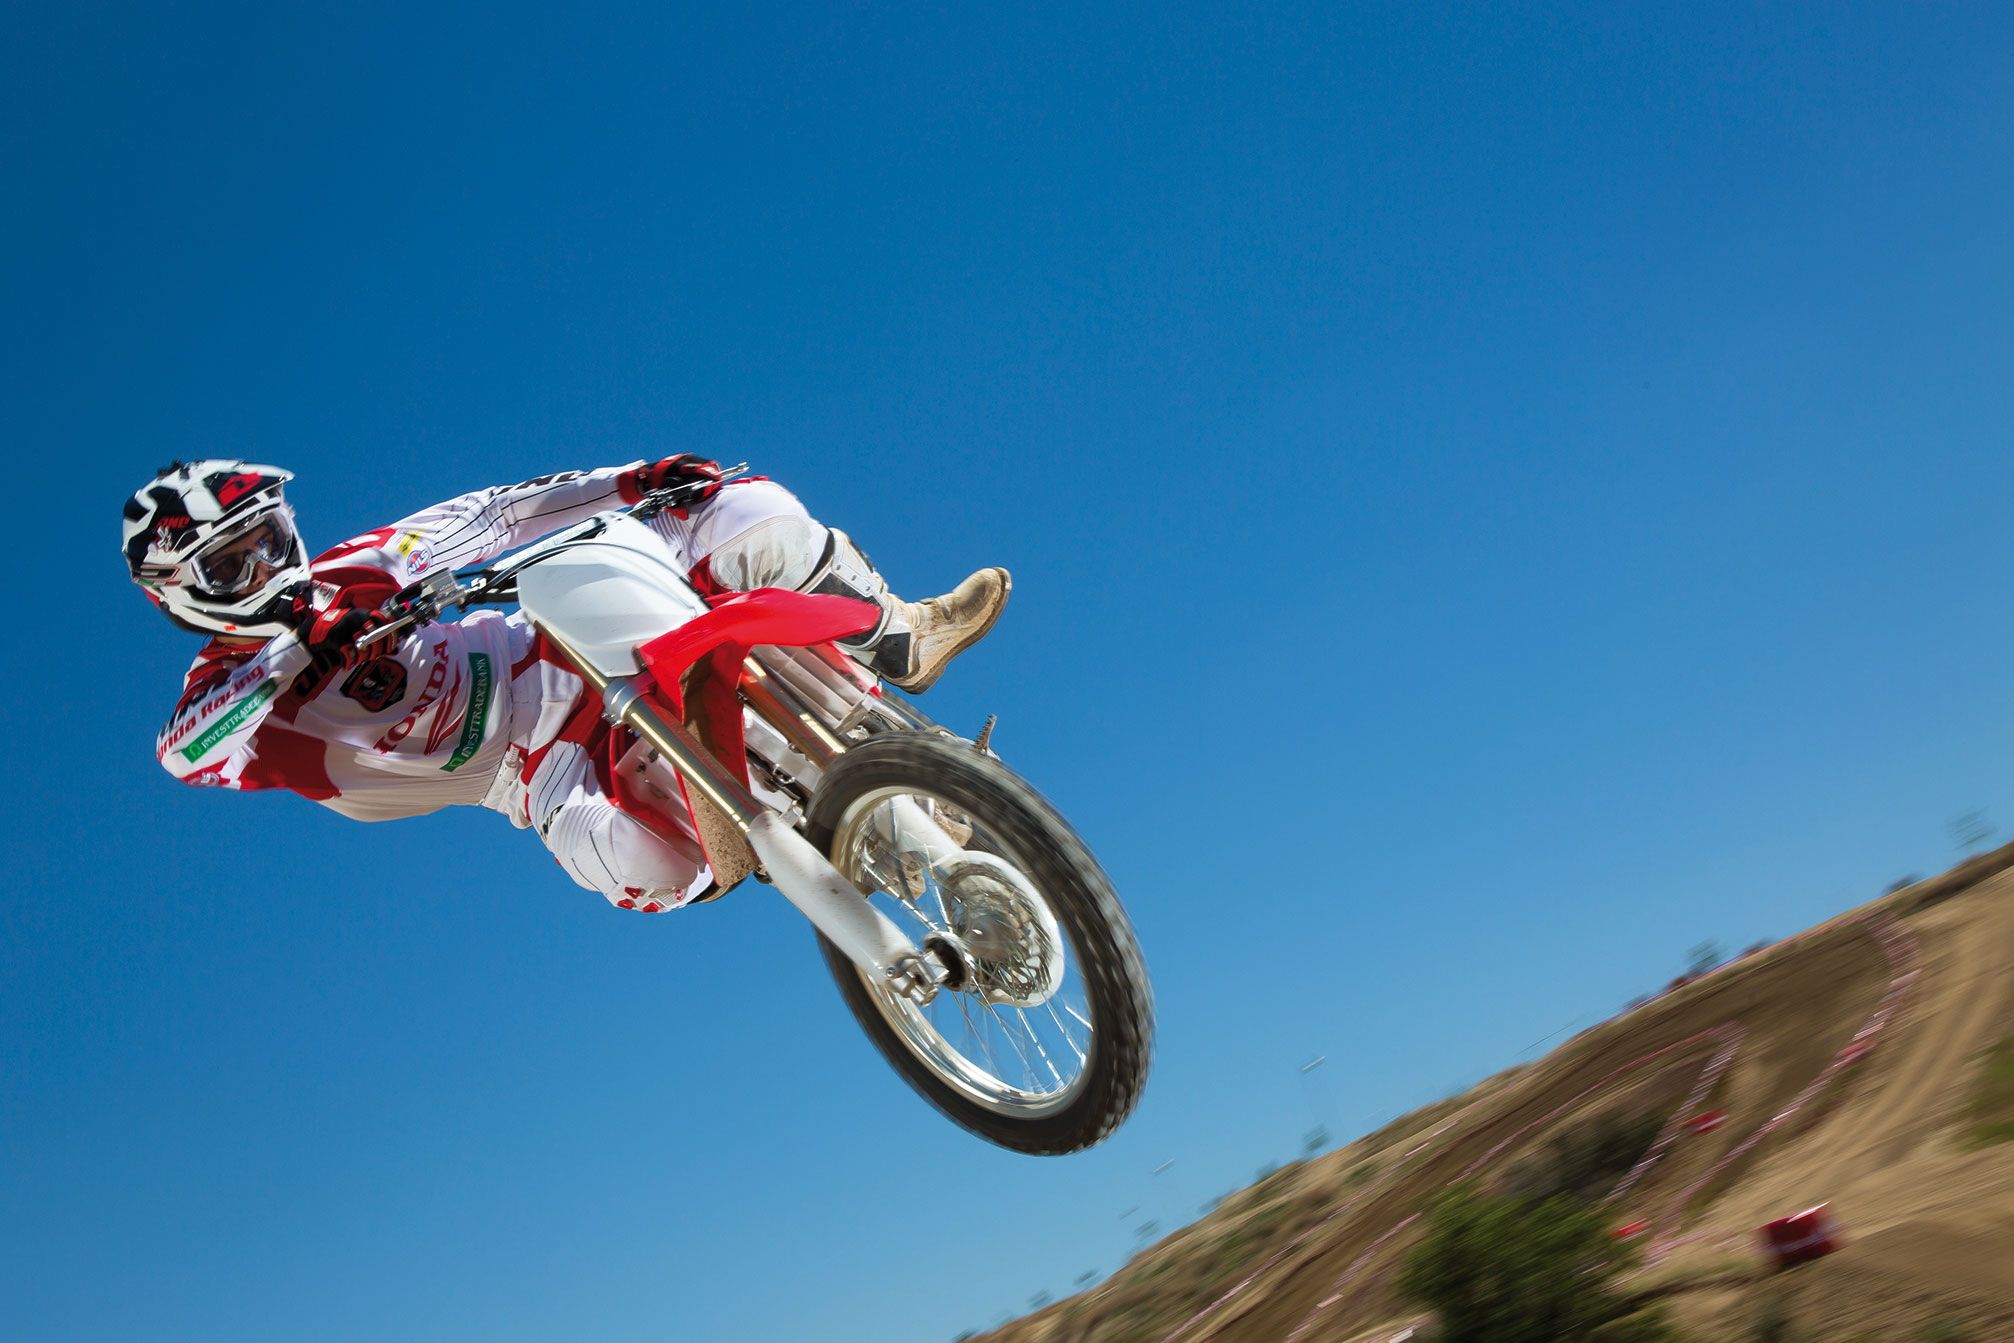 latest wallpapers for mobile phones,land vehicle,vehicle,motocross,freestyle motocross,motorcycling